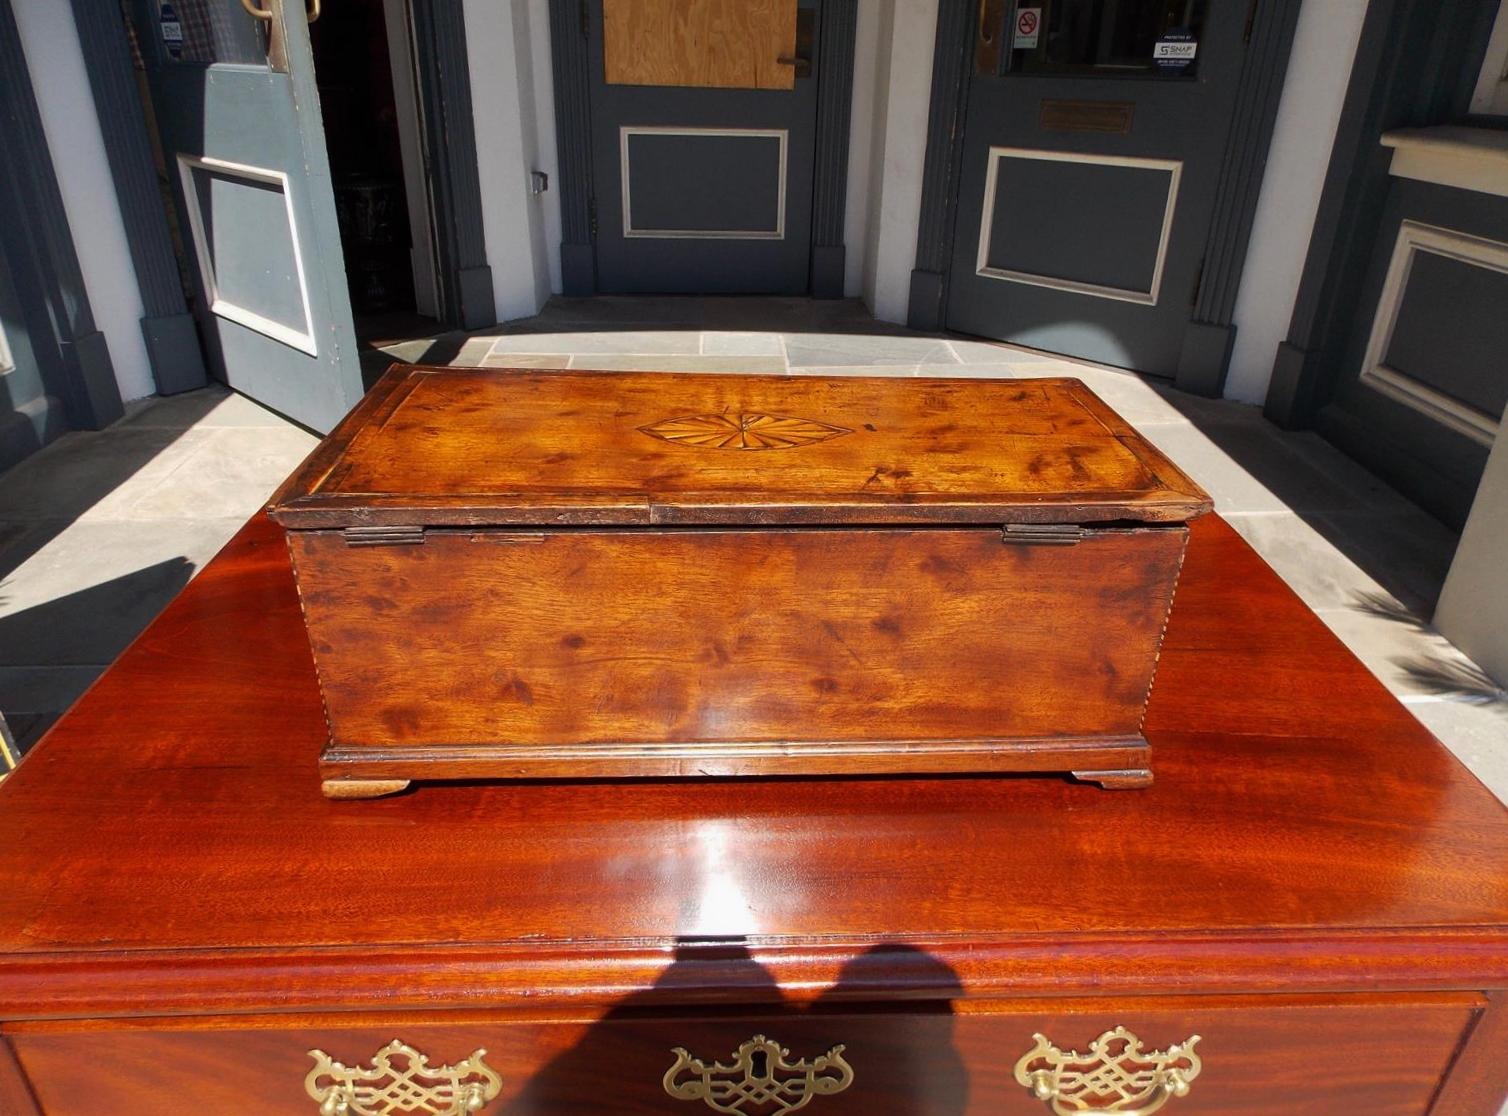 American Walnut Satinwood Inlaid Valuables Box with Original Feet, Circa 1780 For Sale 6